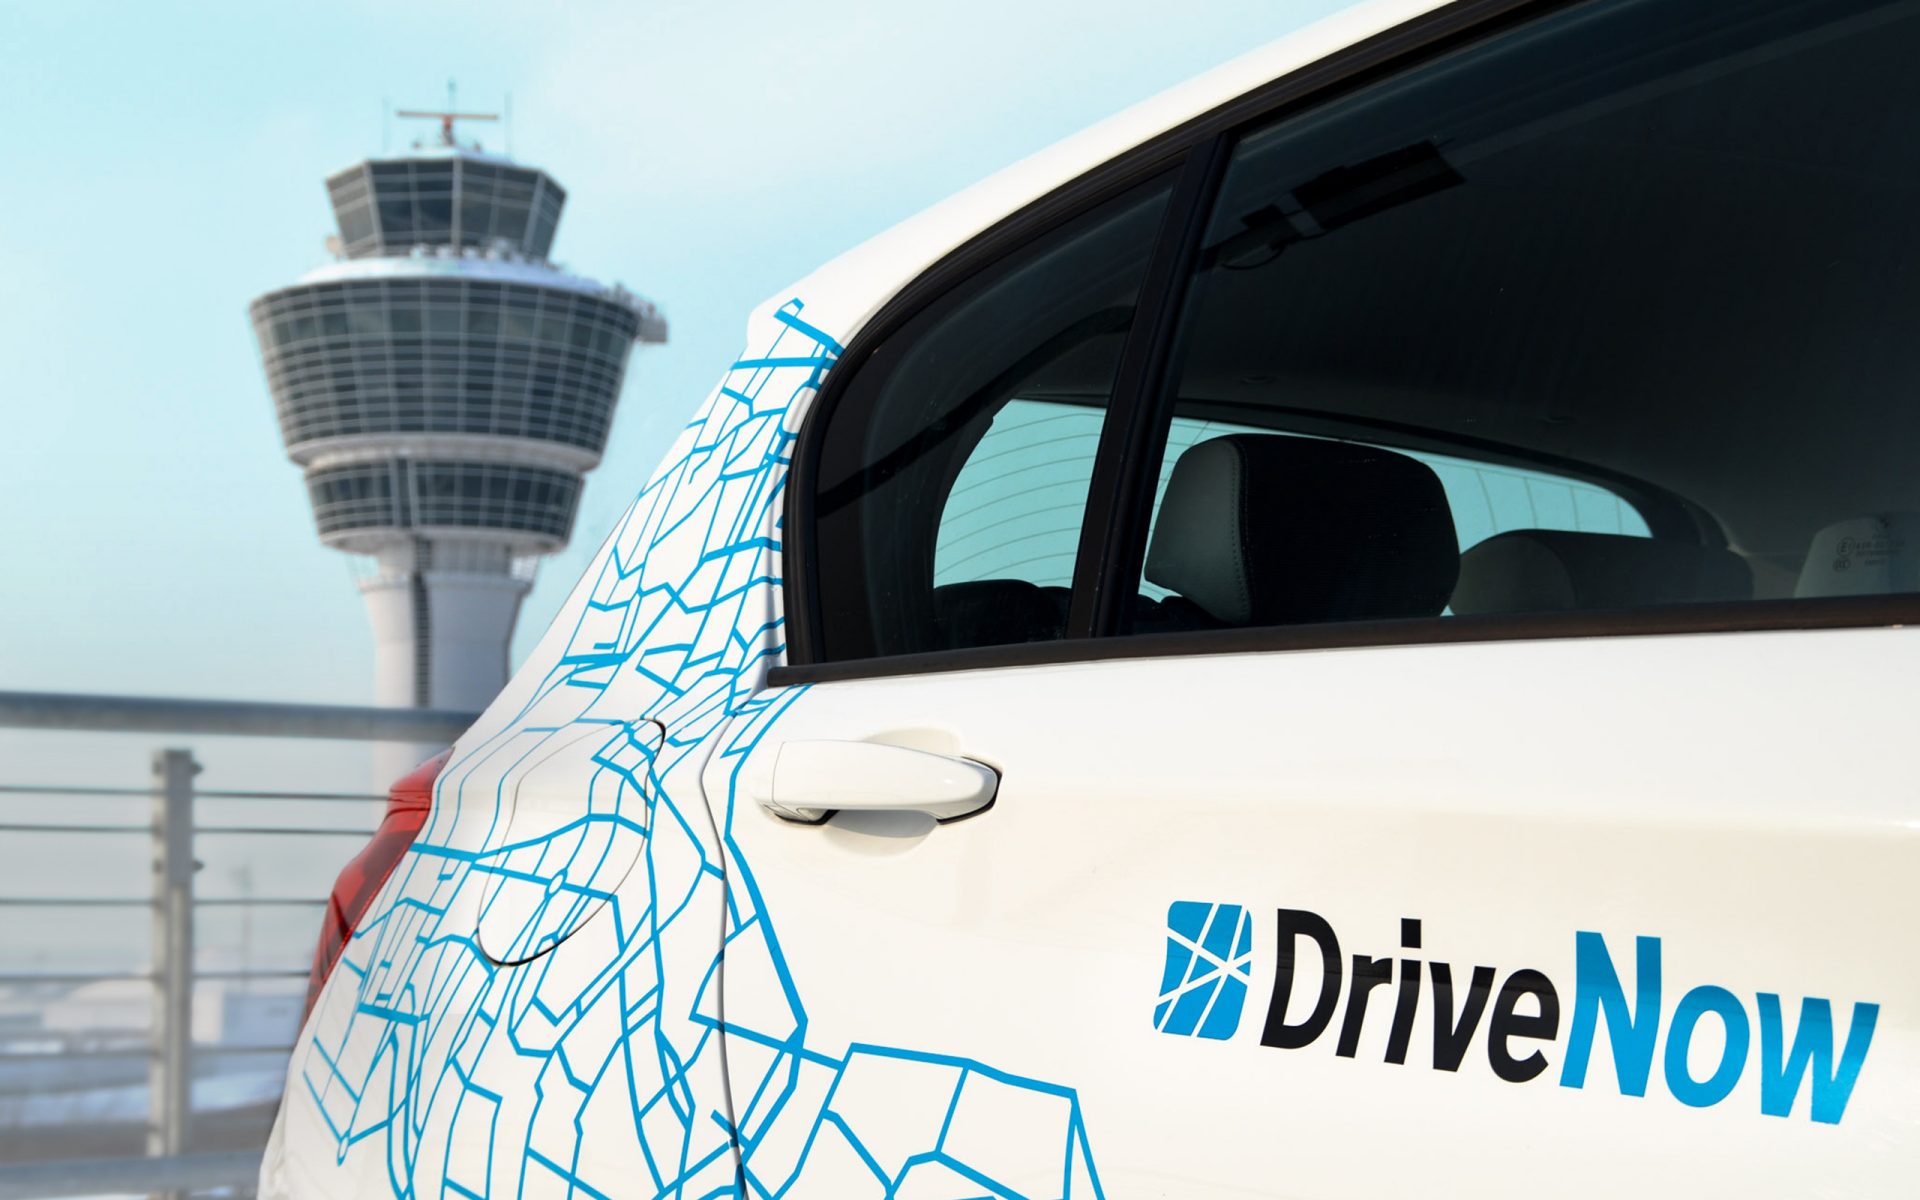 The BMW Group unveils its new mobility service, DriveNow.